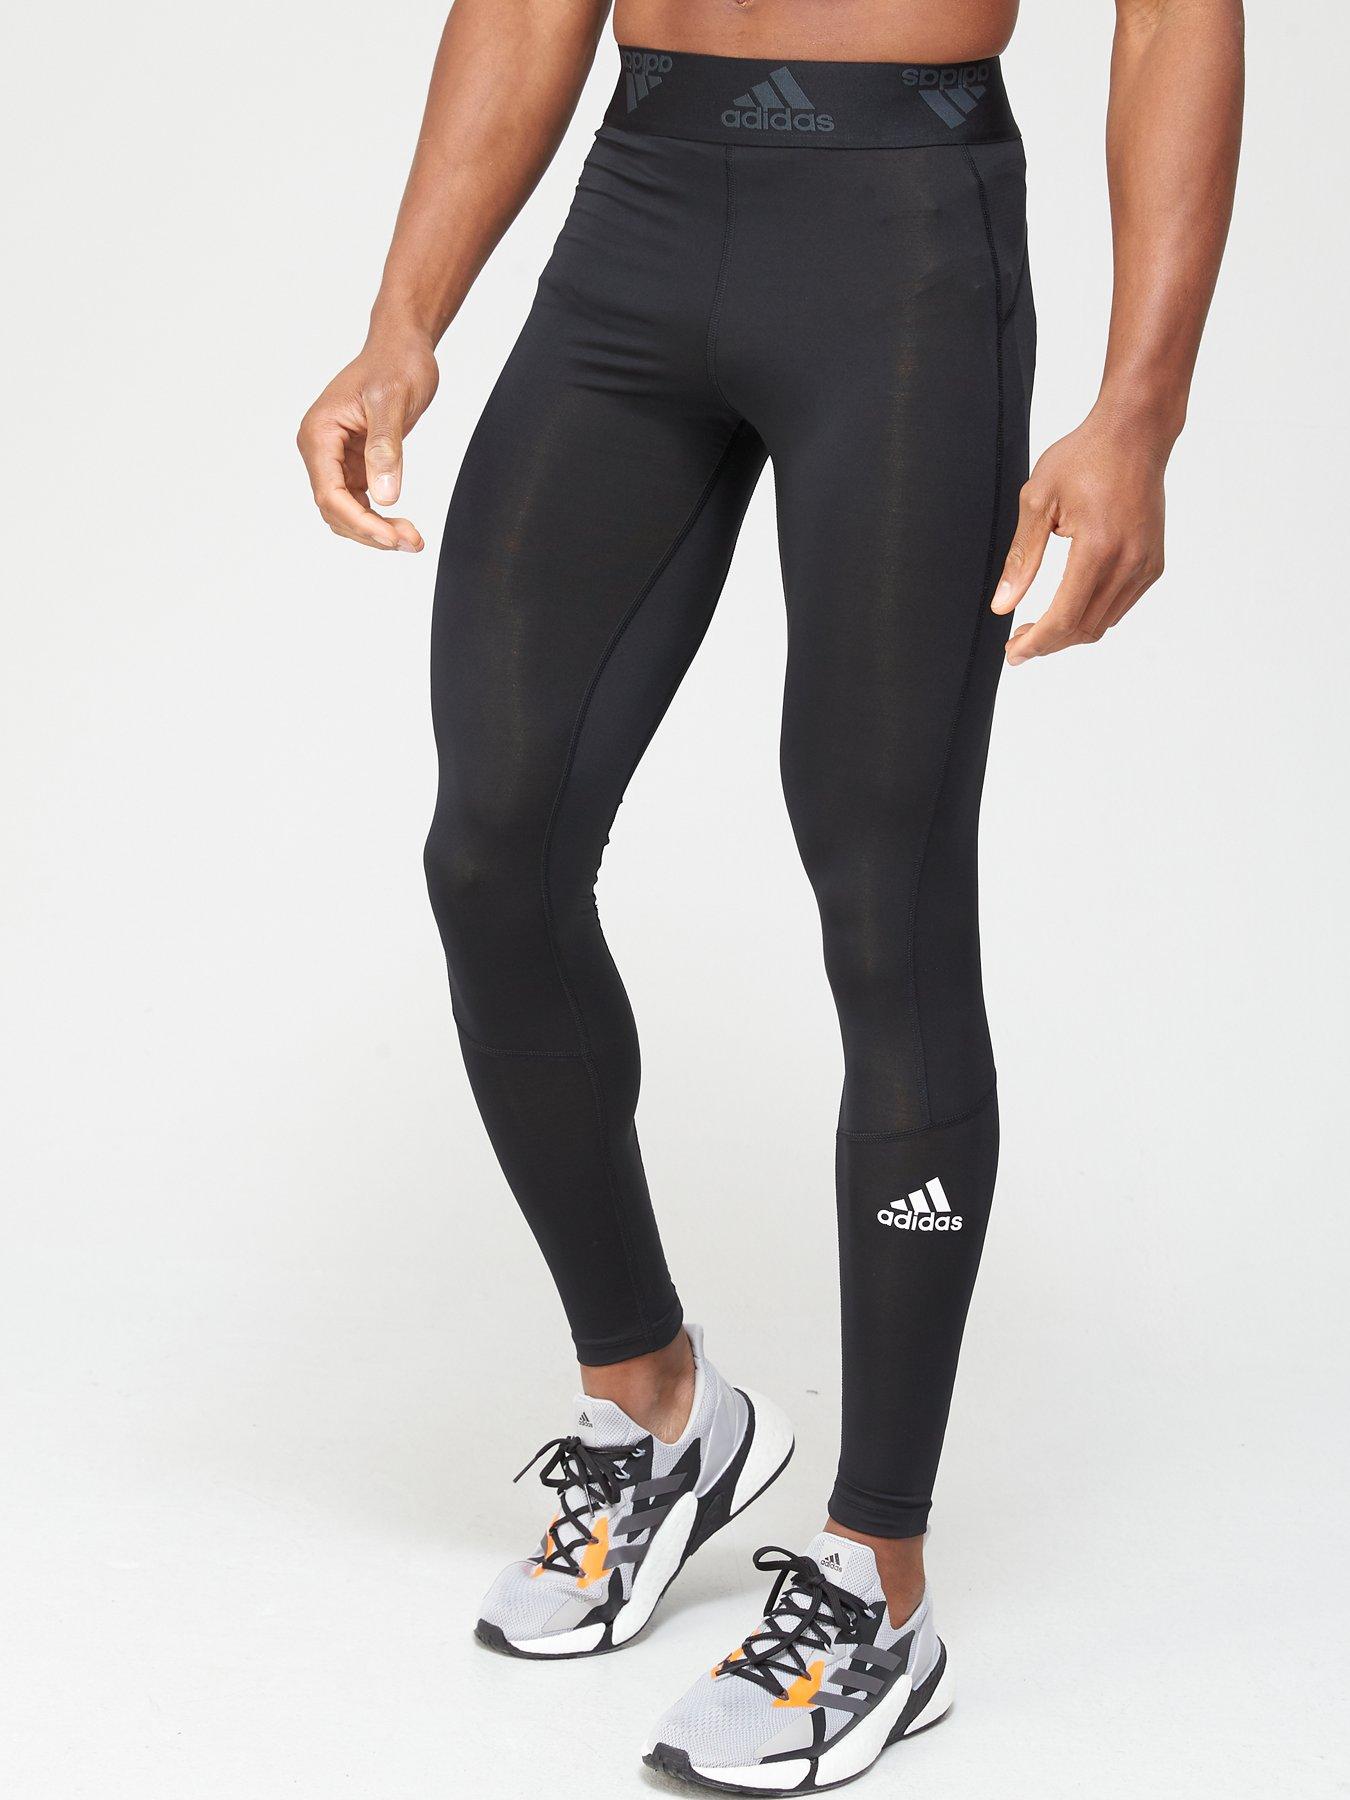 Details about   Mens Compression Under Leggings Base Layer Pants Gym Sport Trainning Trousers UK 